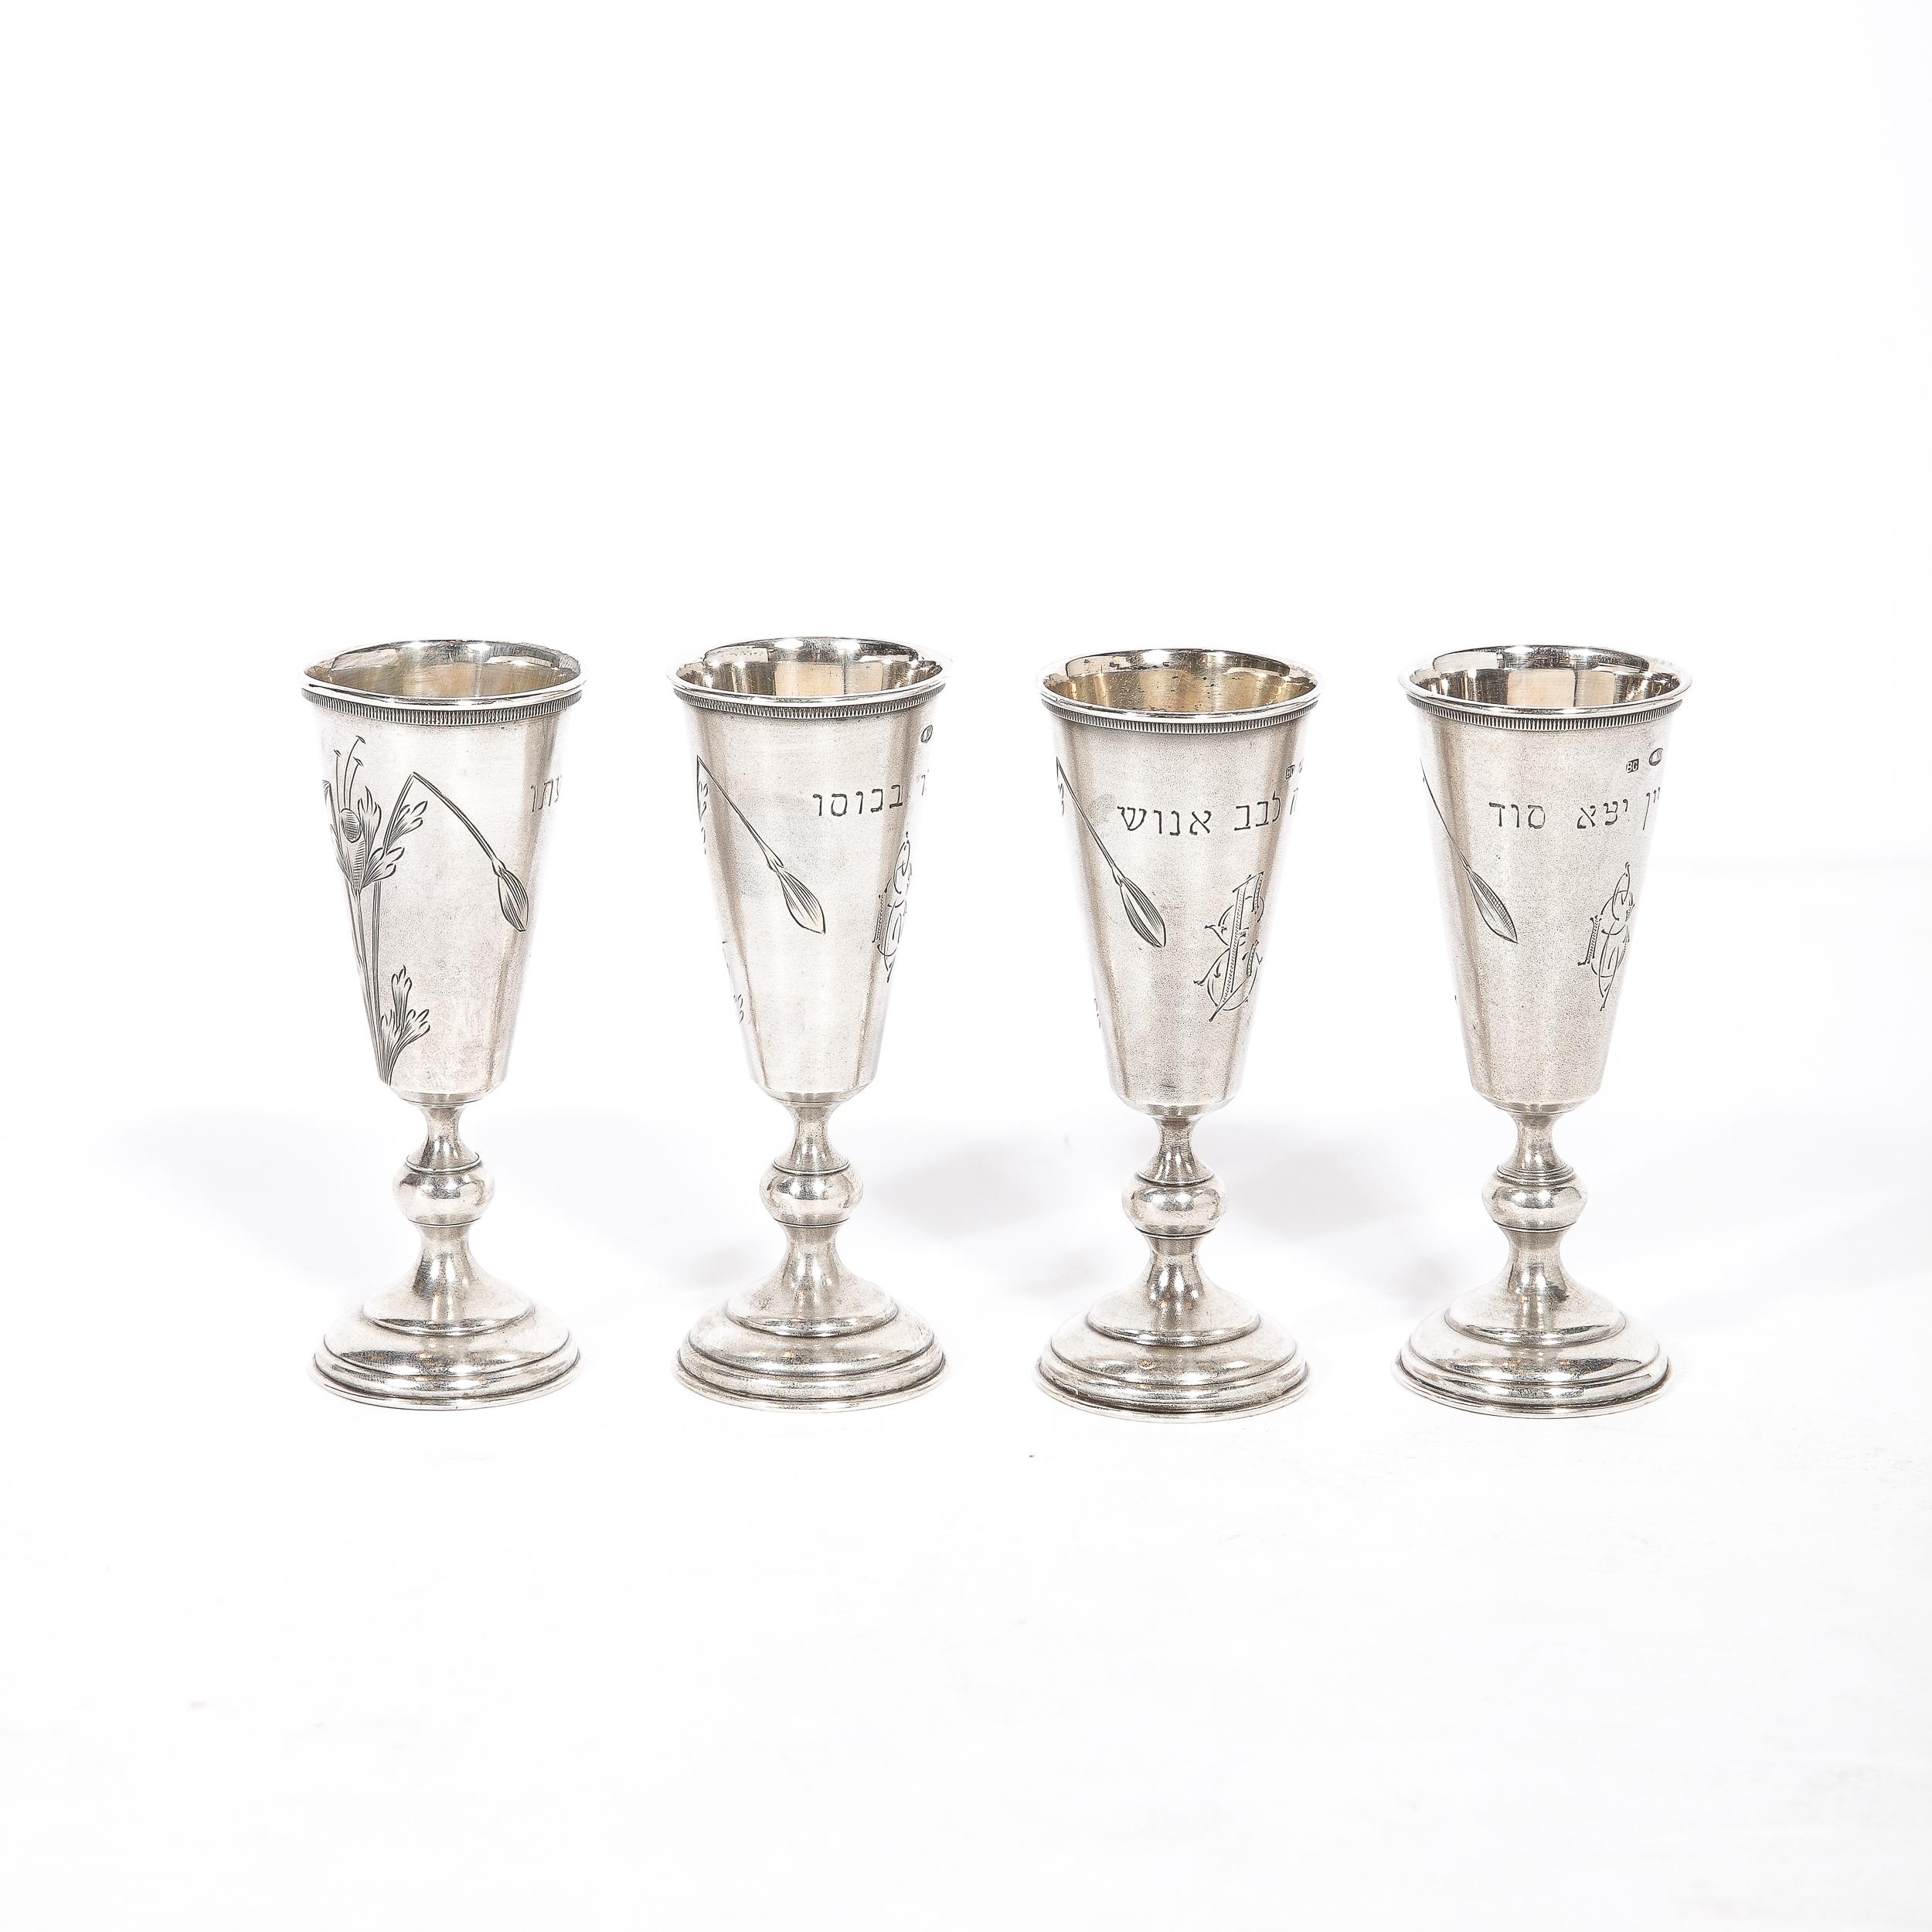 Late 19th Century Set of 4 Antique Sterling Silver Russian Kiddish Cups With Kokoshnik Stamp 